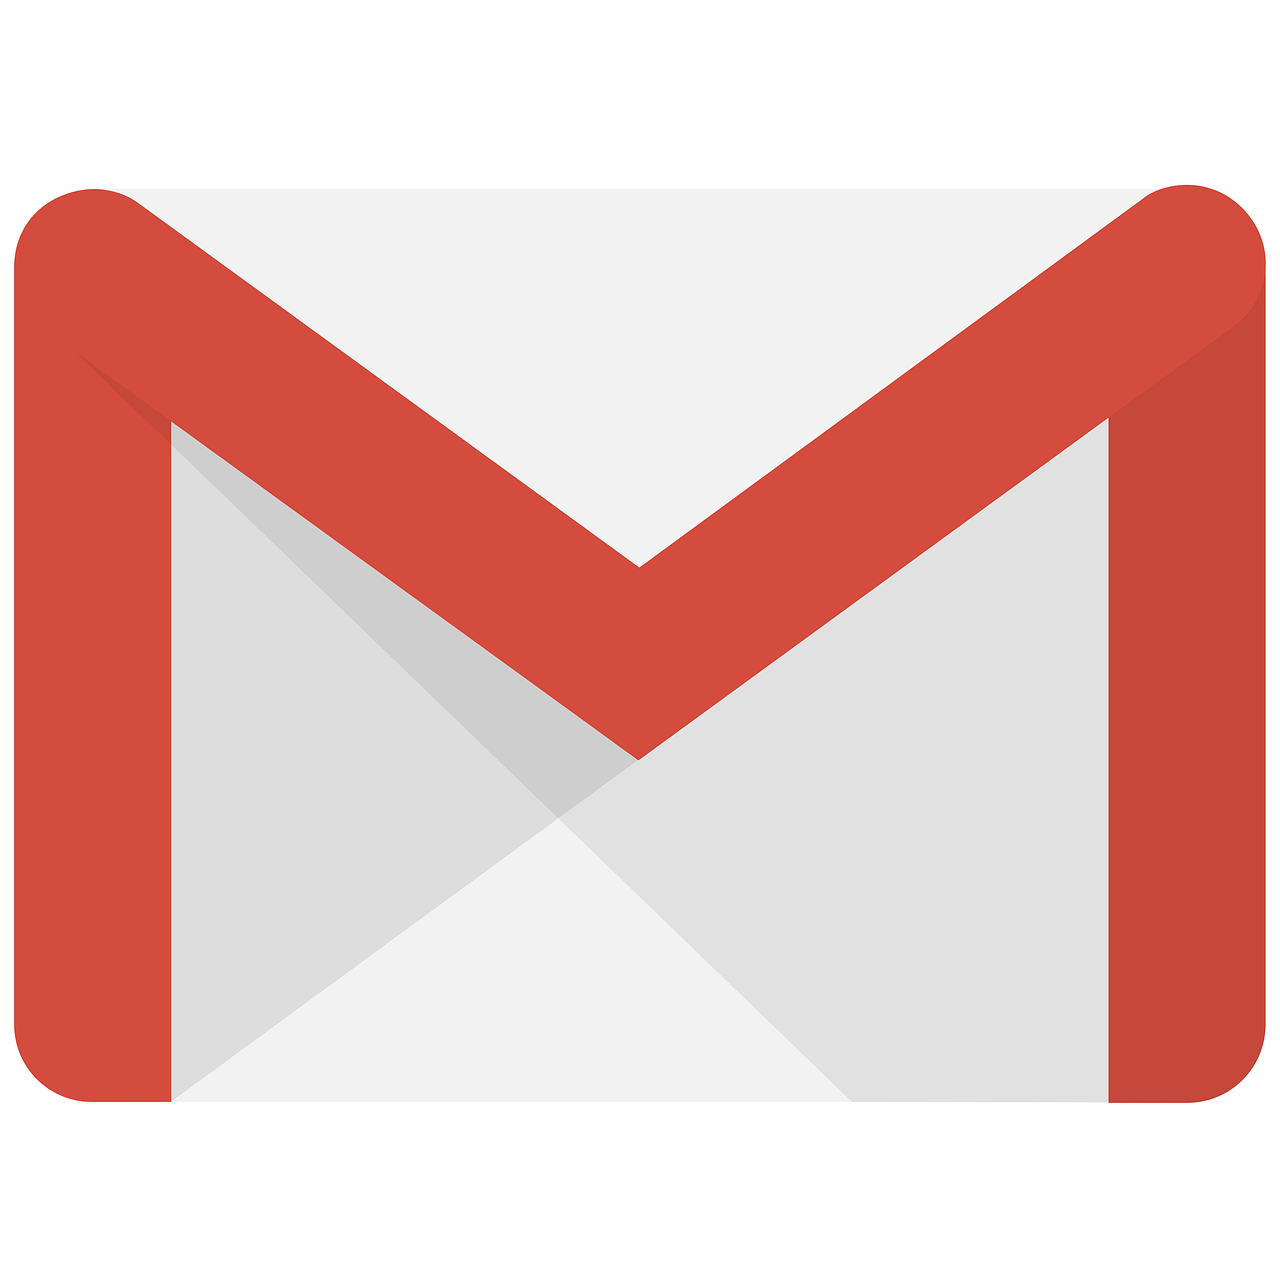 How to Set Up Gmail for Business Email in 4 Simple Steps